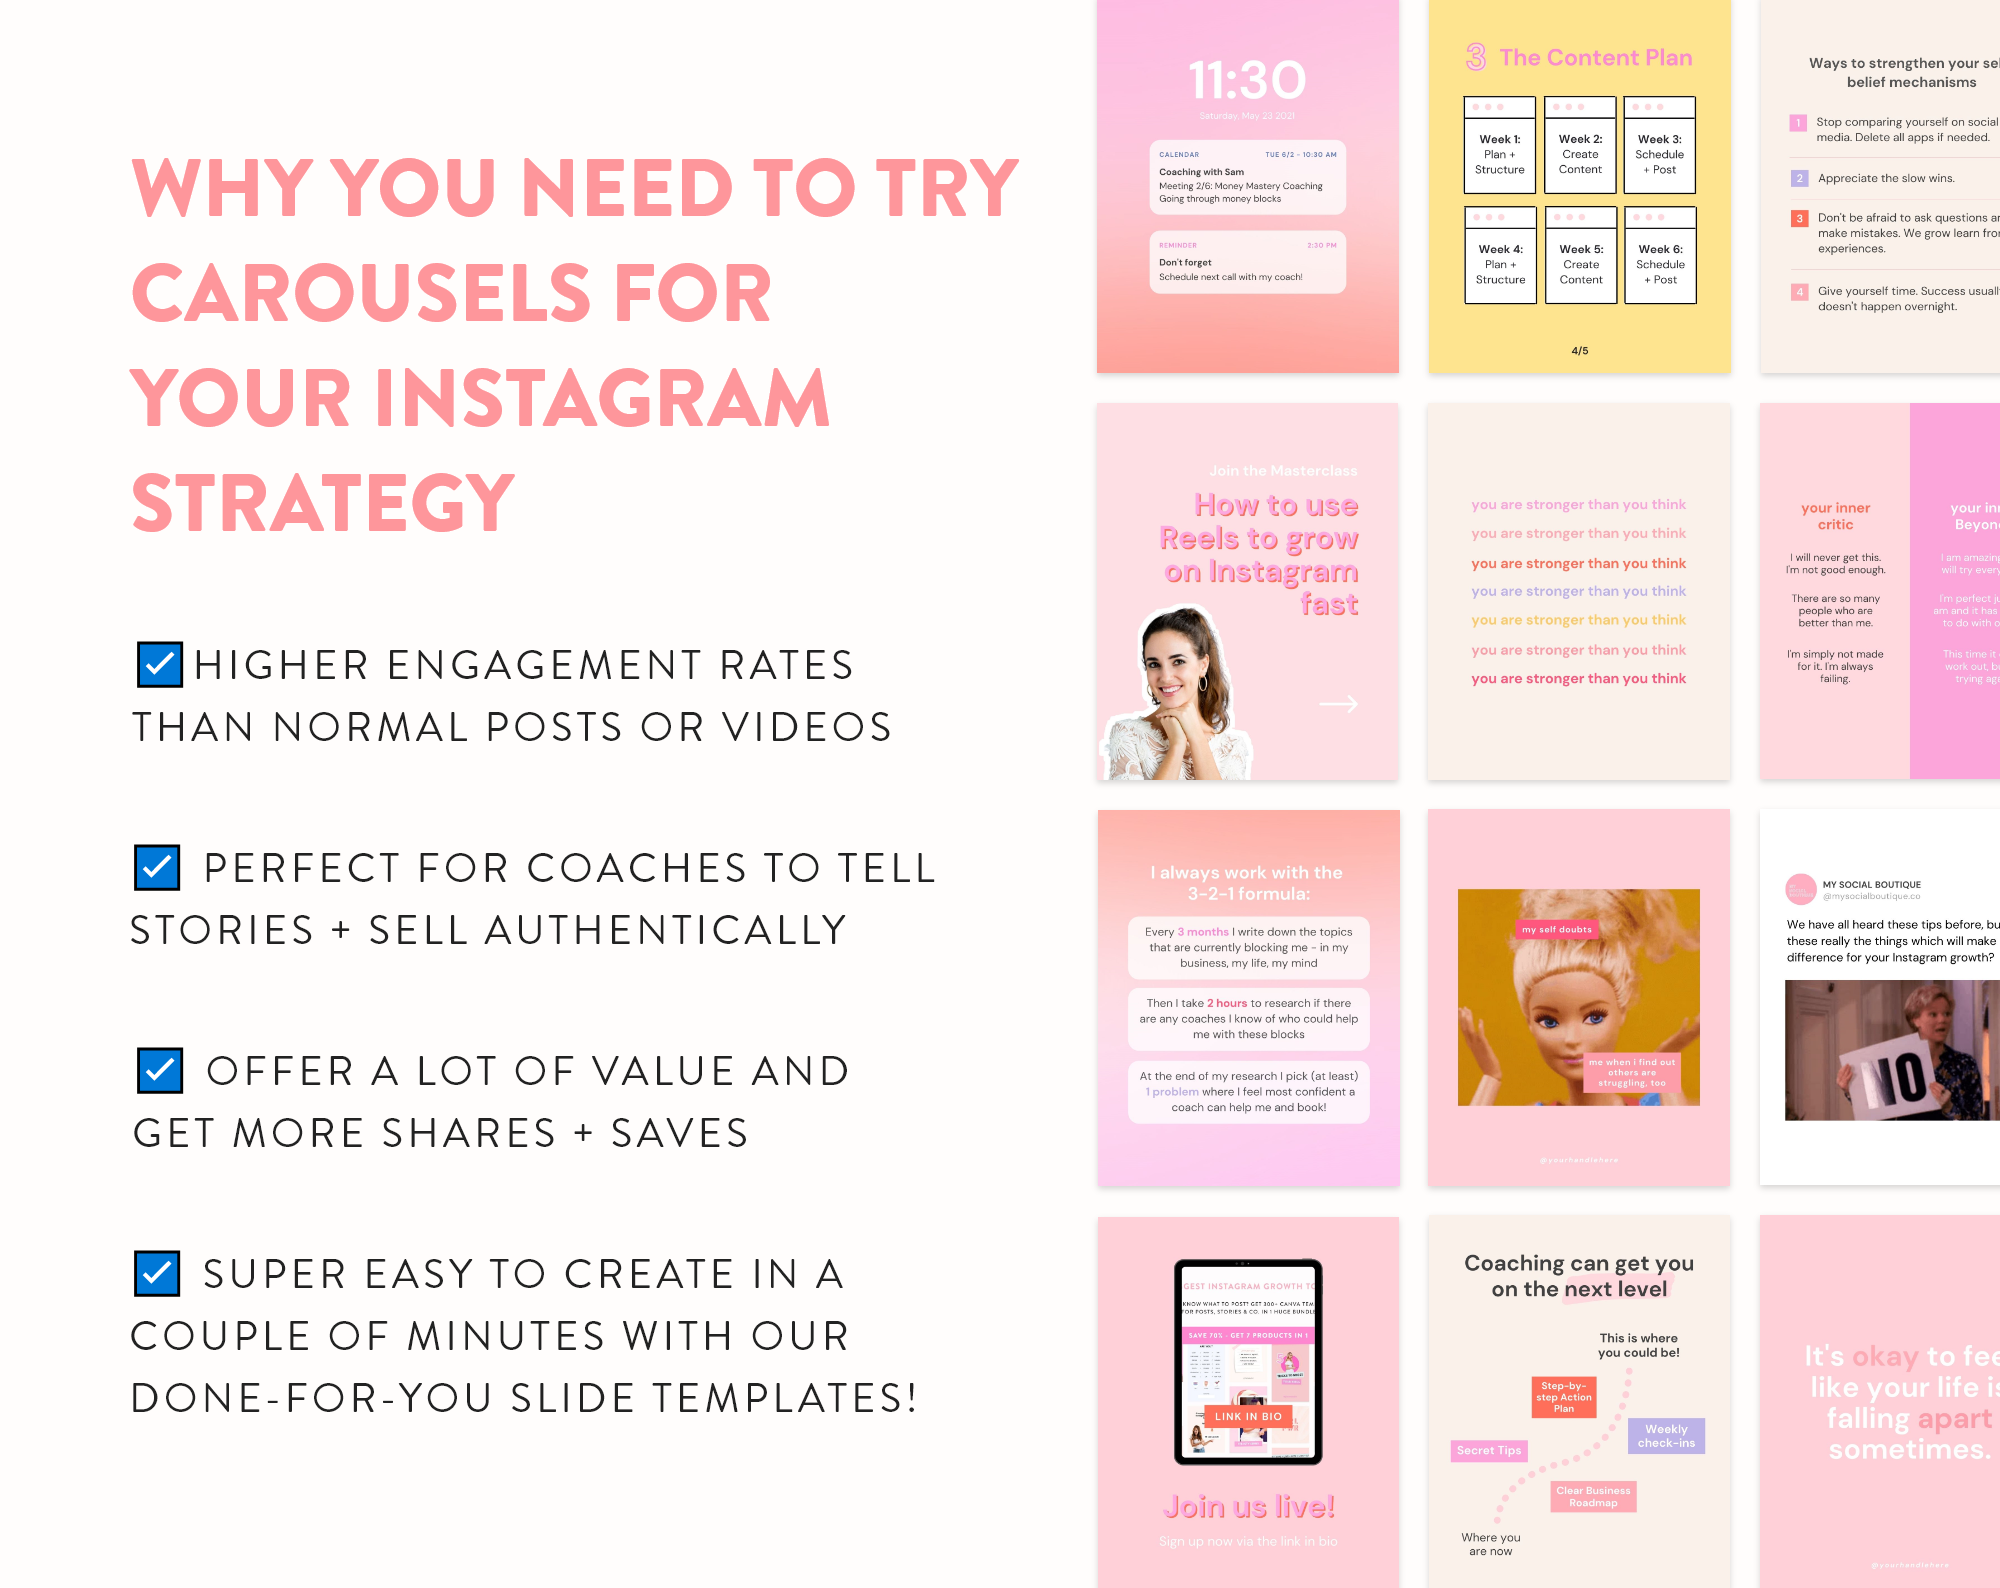 Coach-carousel-Instagram-post-templates-canva-why-you-need-carousels